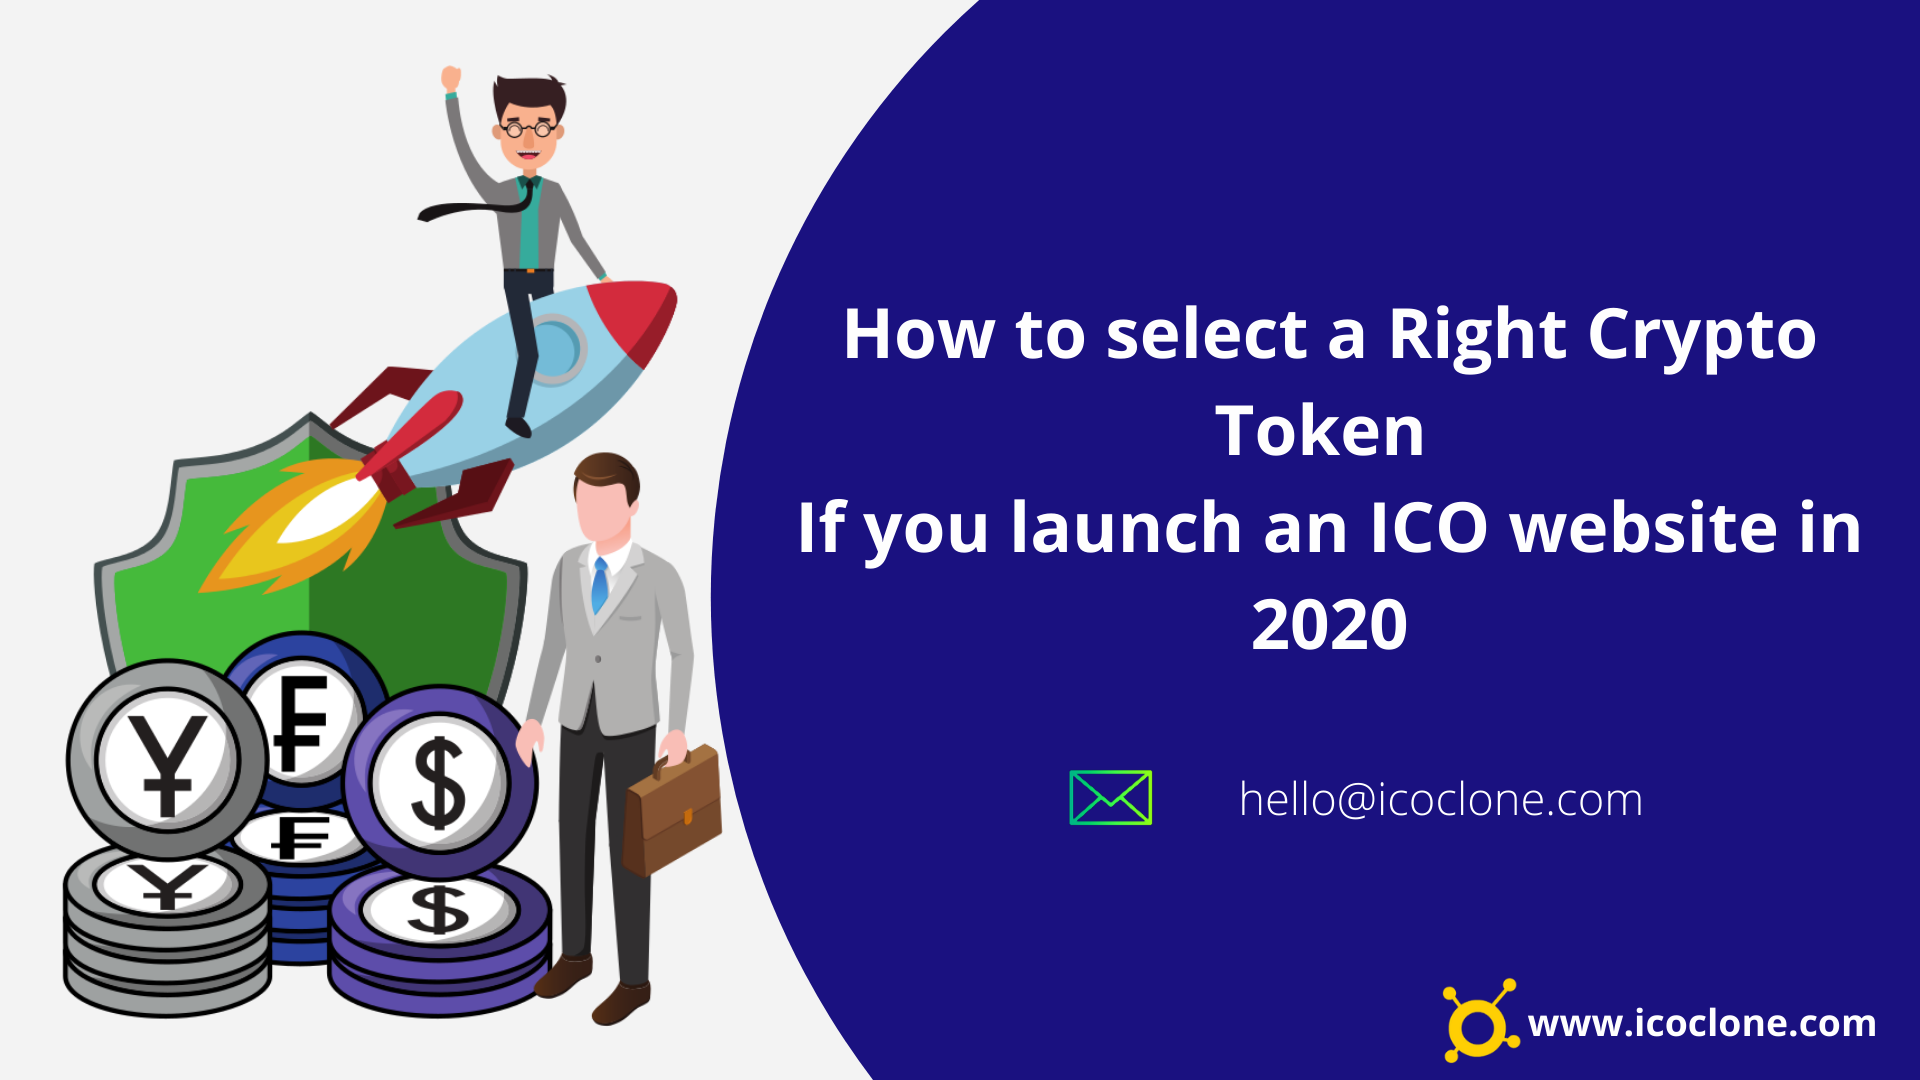 How to select a right crypto token type if you launch an ICO in 2020?